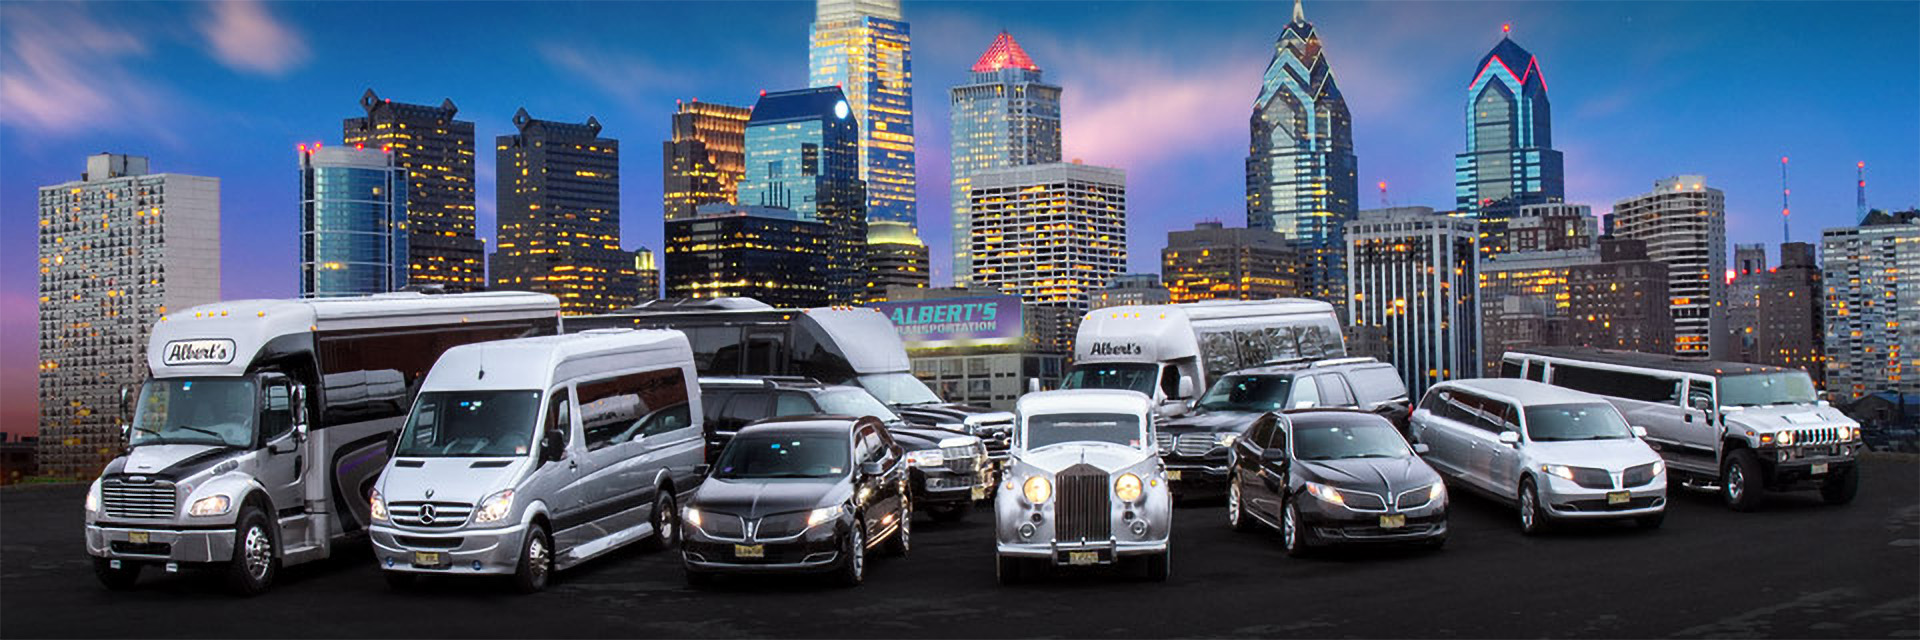 Alberts Limo Services